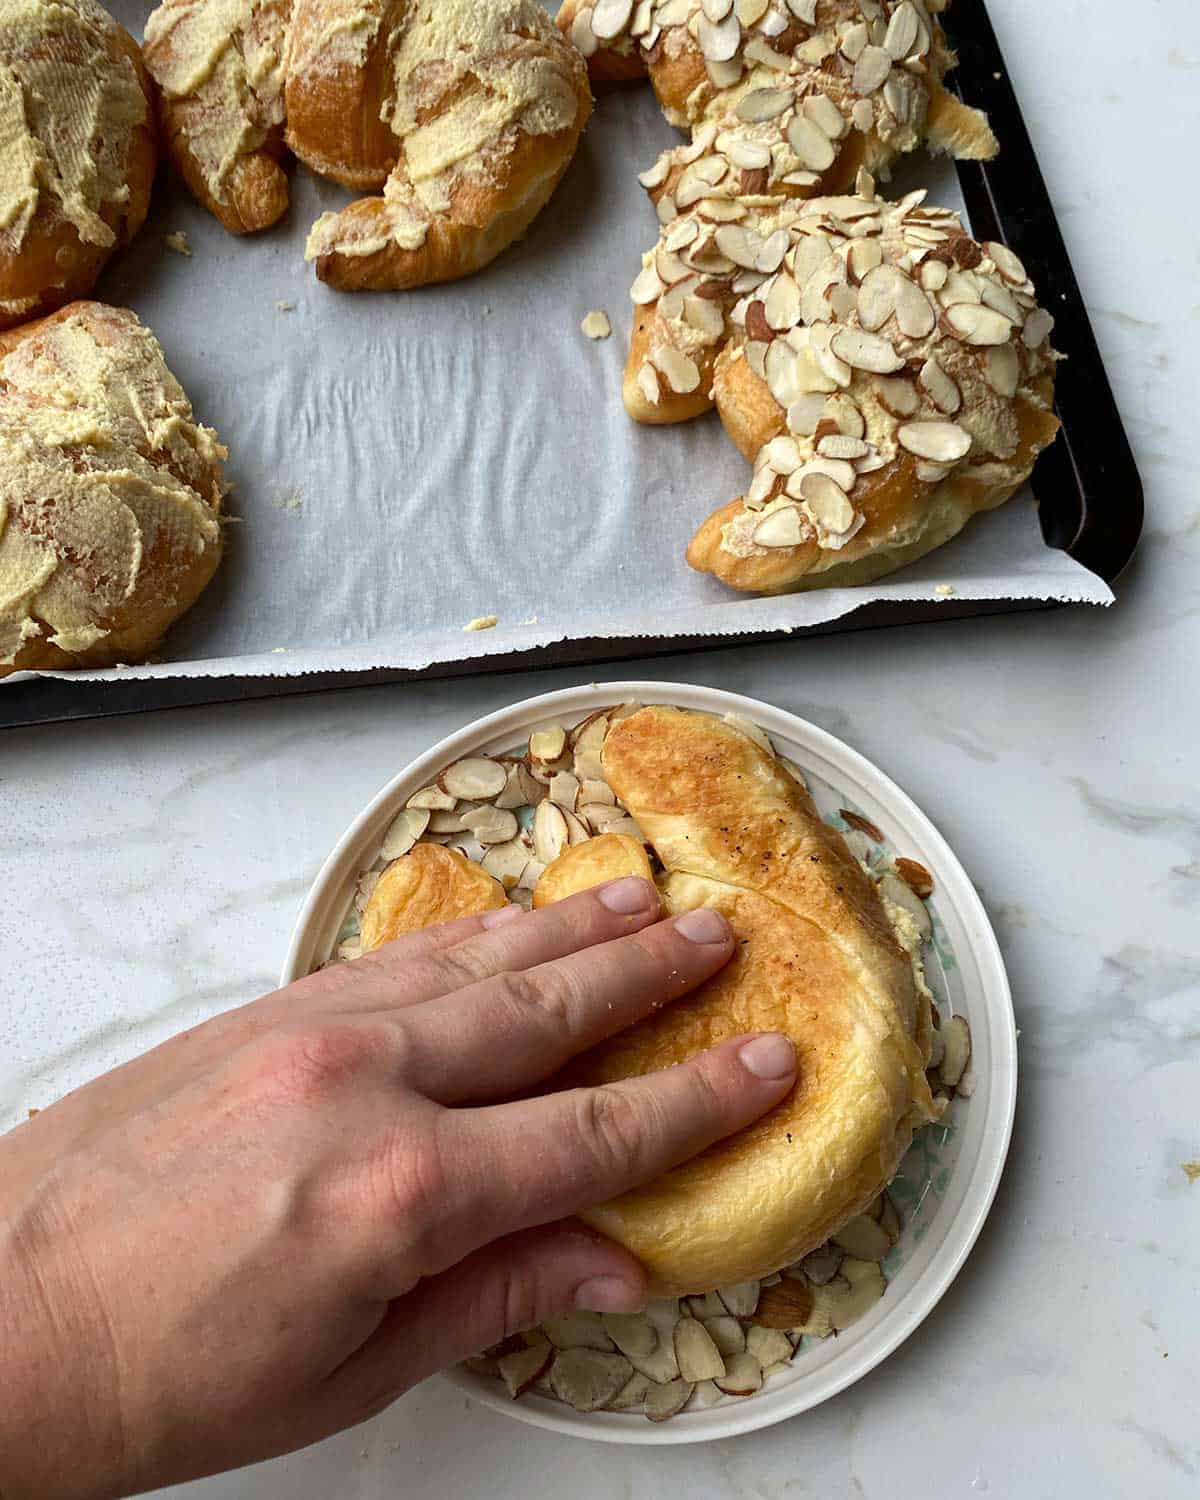 A croissant being dipped in slivered almonds before going on a baking tray.